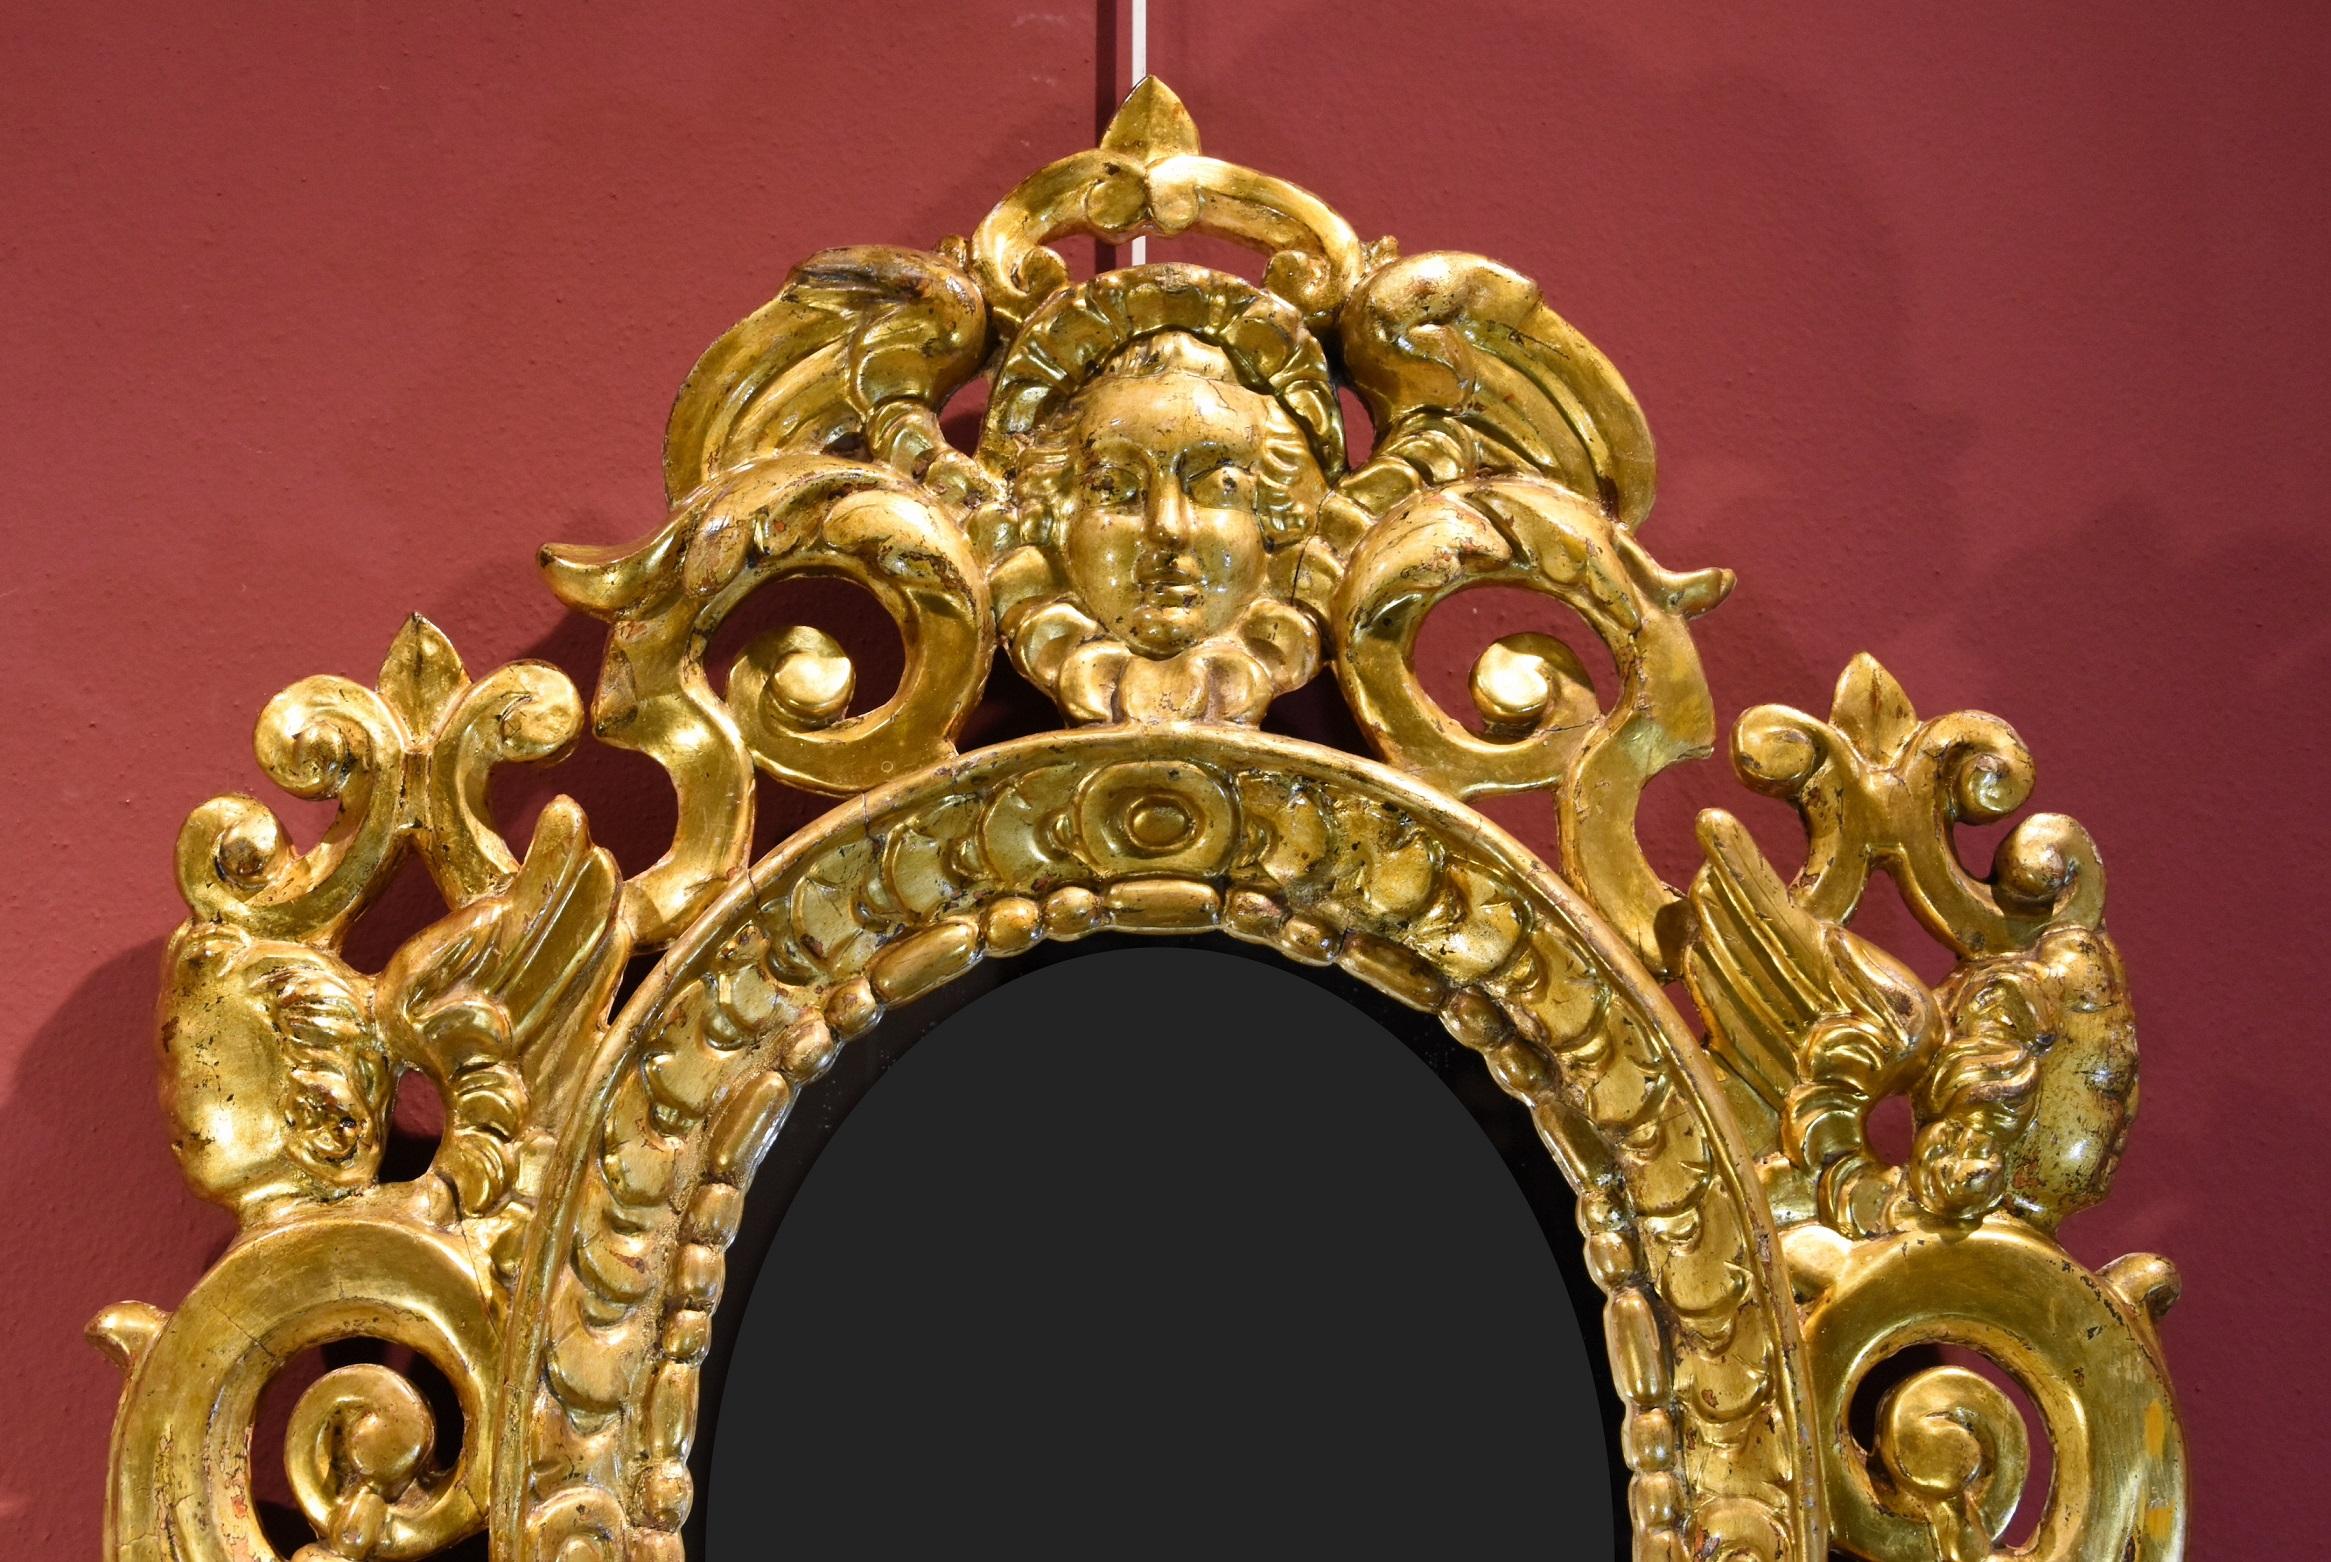 Pair Carved Gilded Mirrors Gold Wood Venice 18th Century Italy Quality Baroque For Sale 1